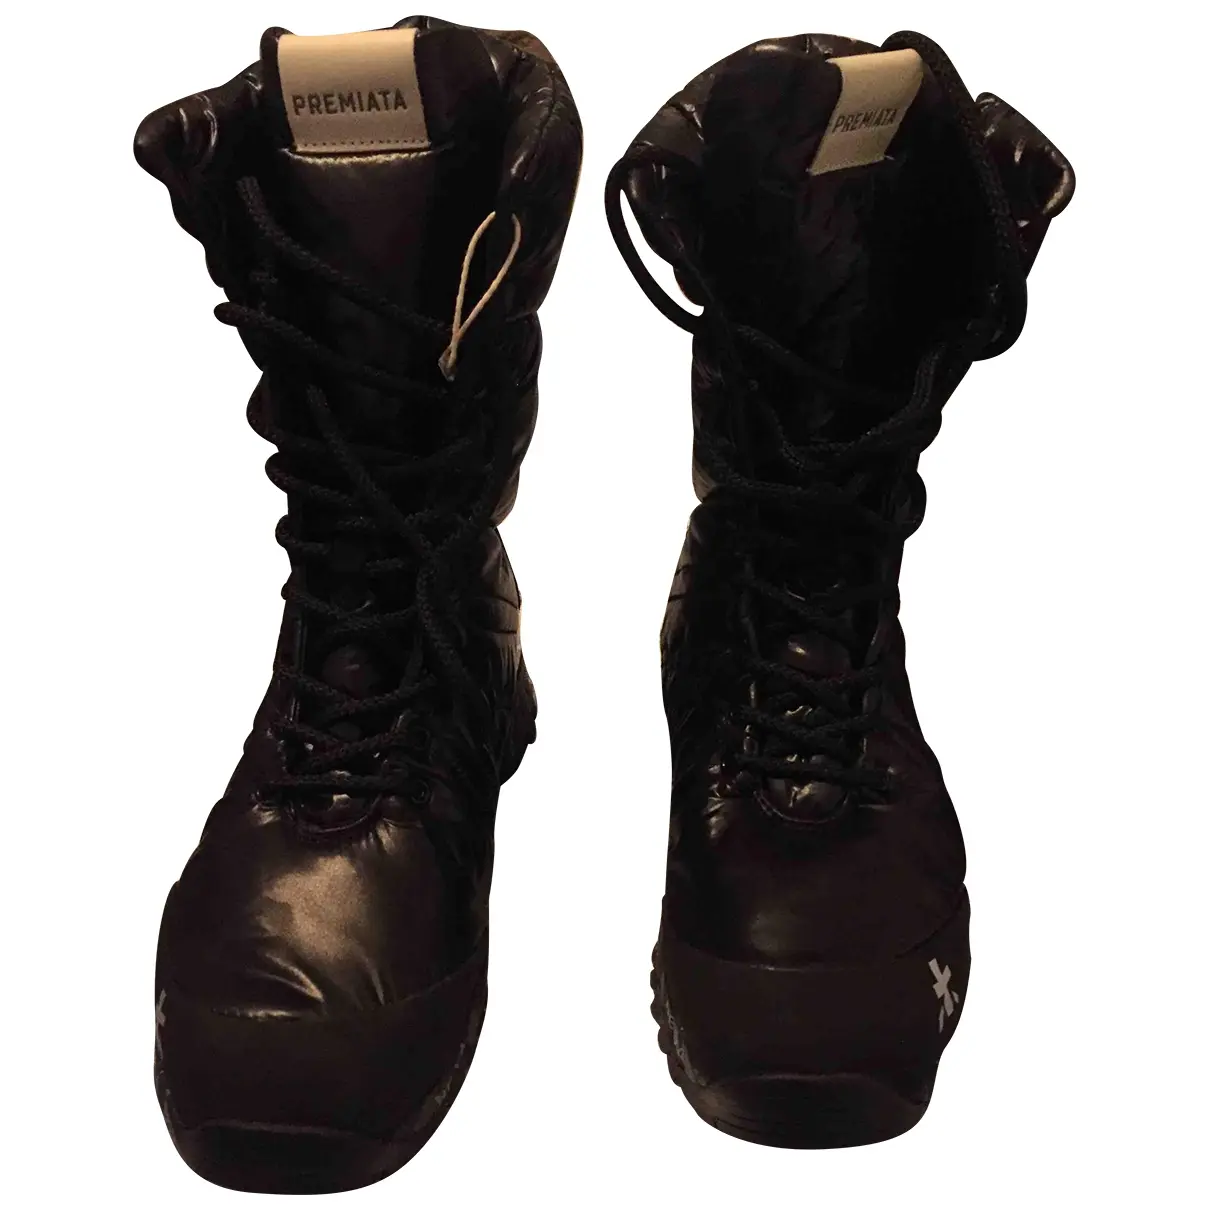 Patent leather lace up boots Premiata